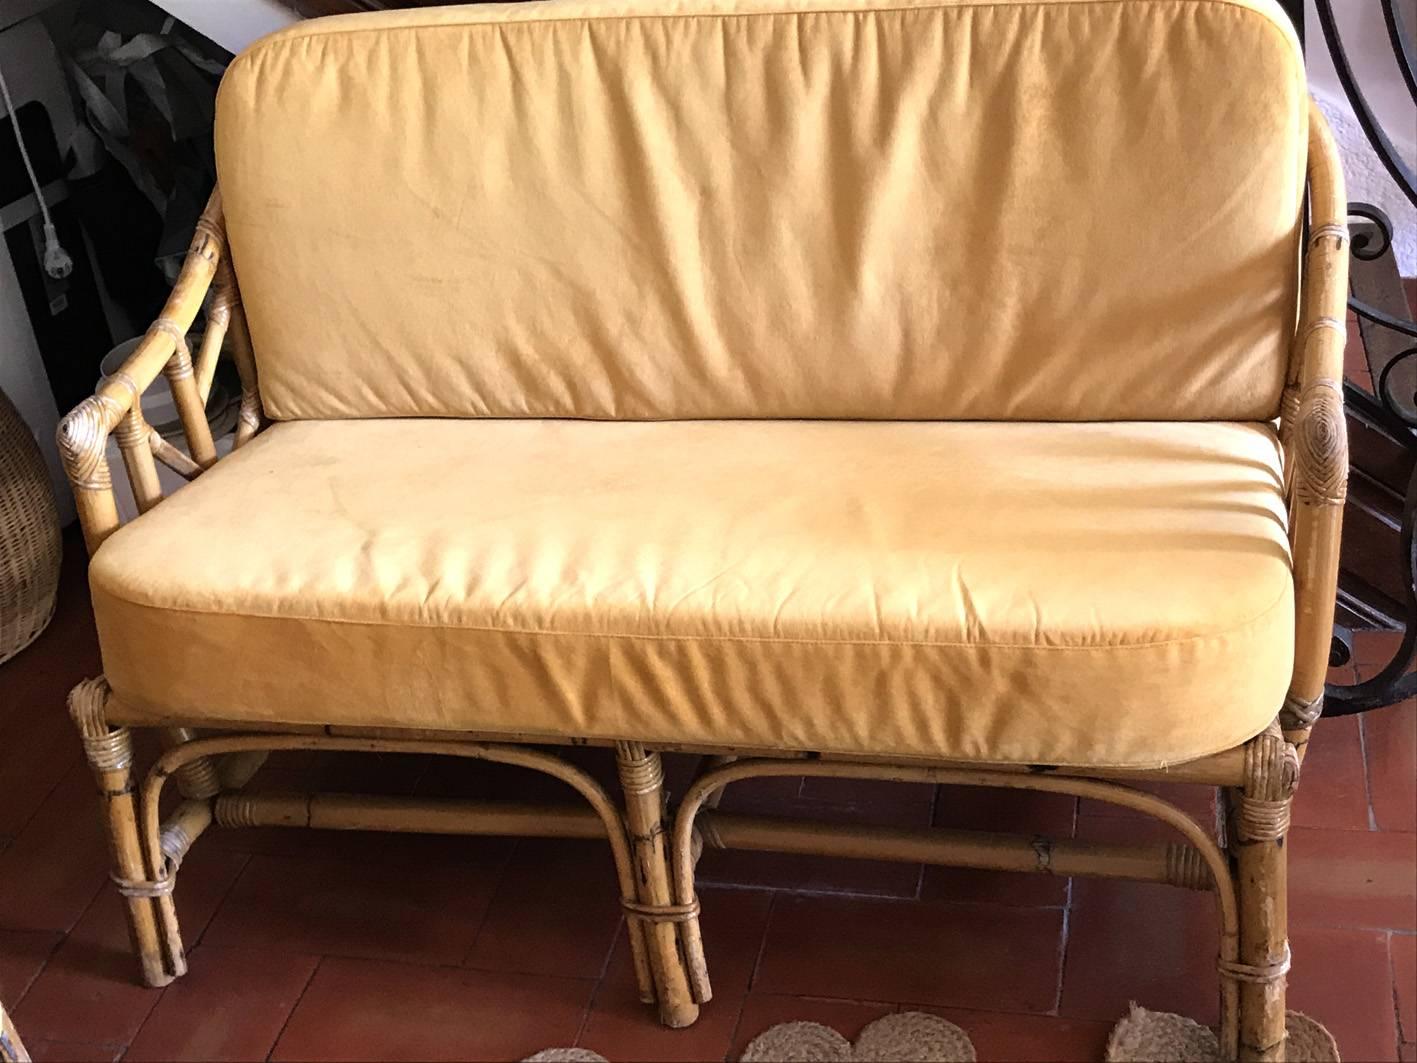 French Audoux Minet wicker sofa, circa 1960. In good condition.